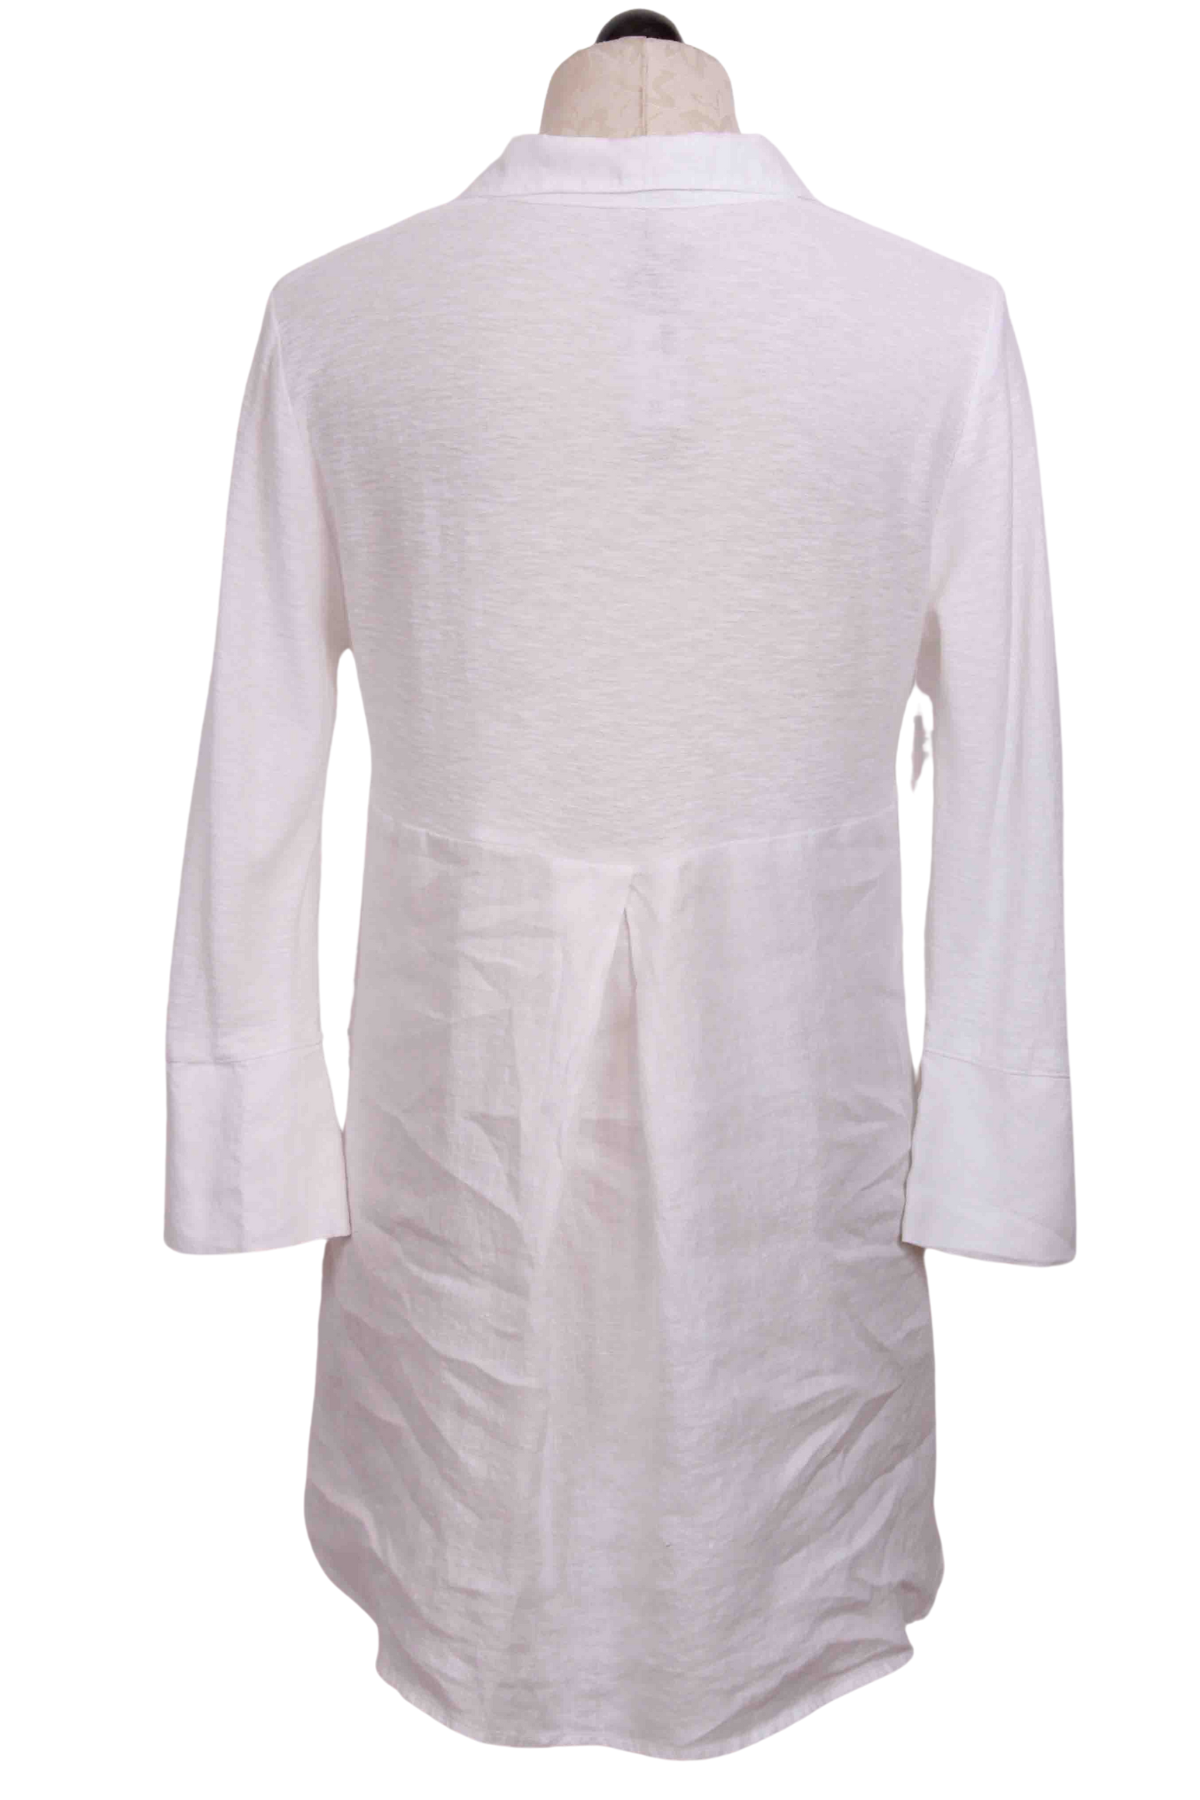 back view of White Button Down Easy Shirt by Cut Loose